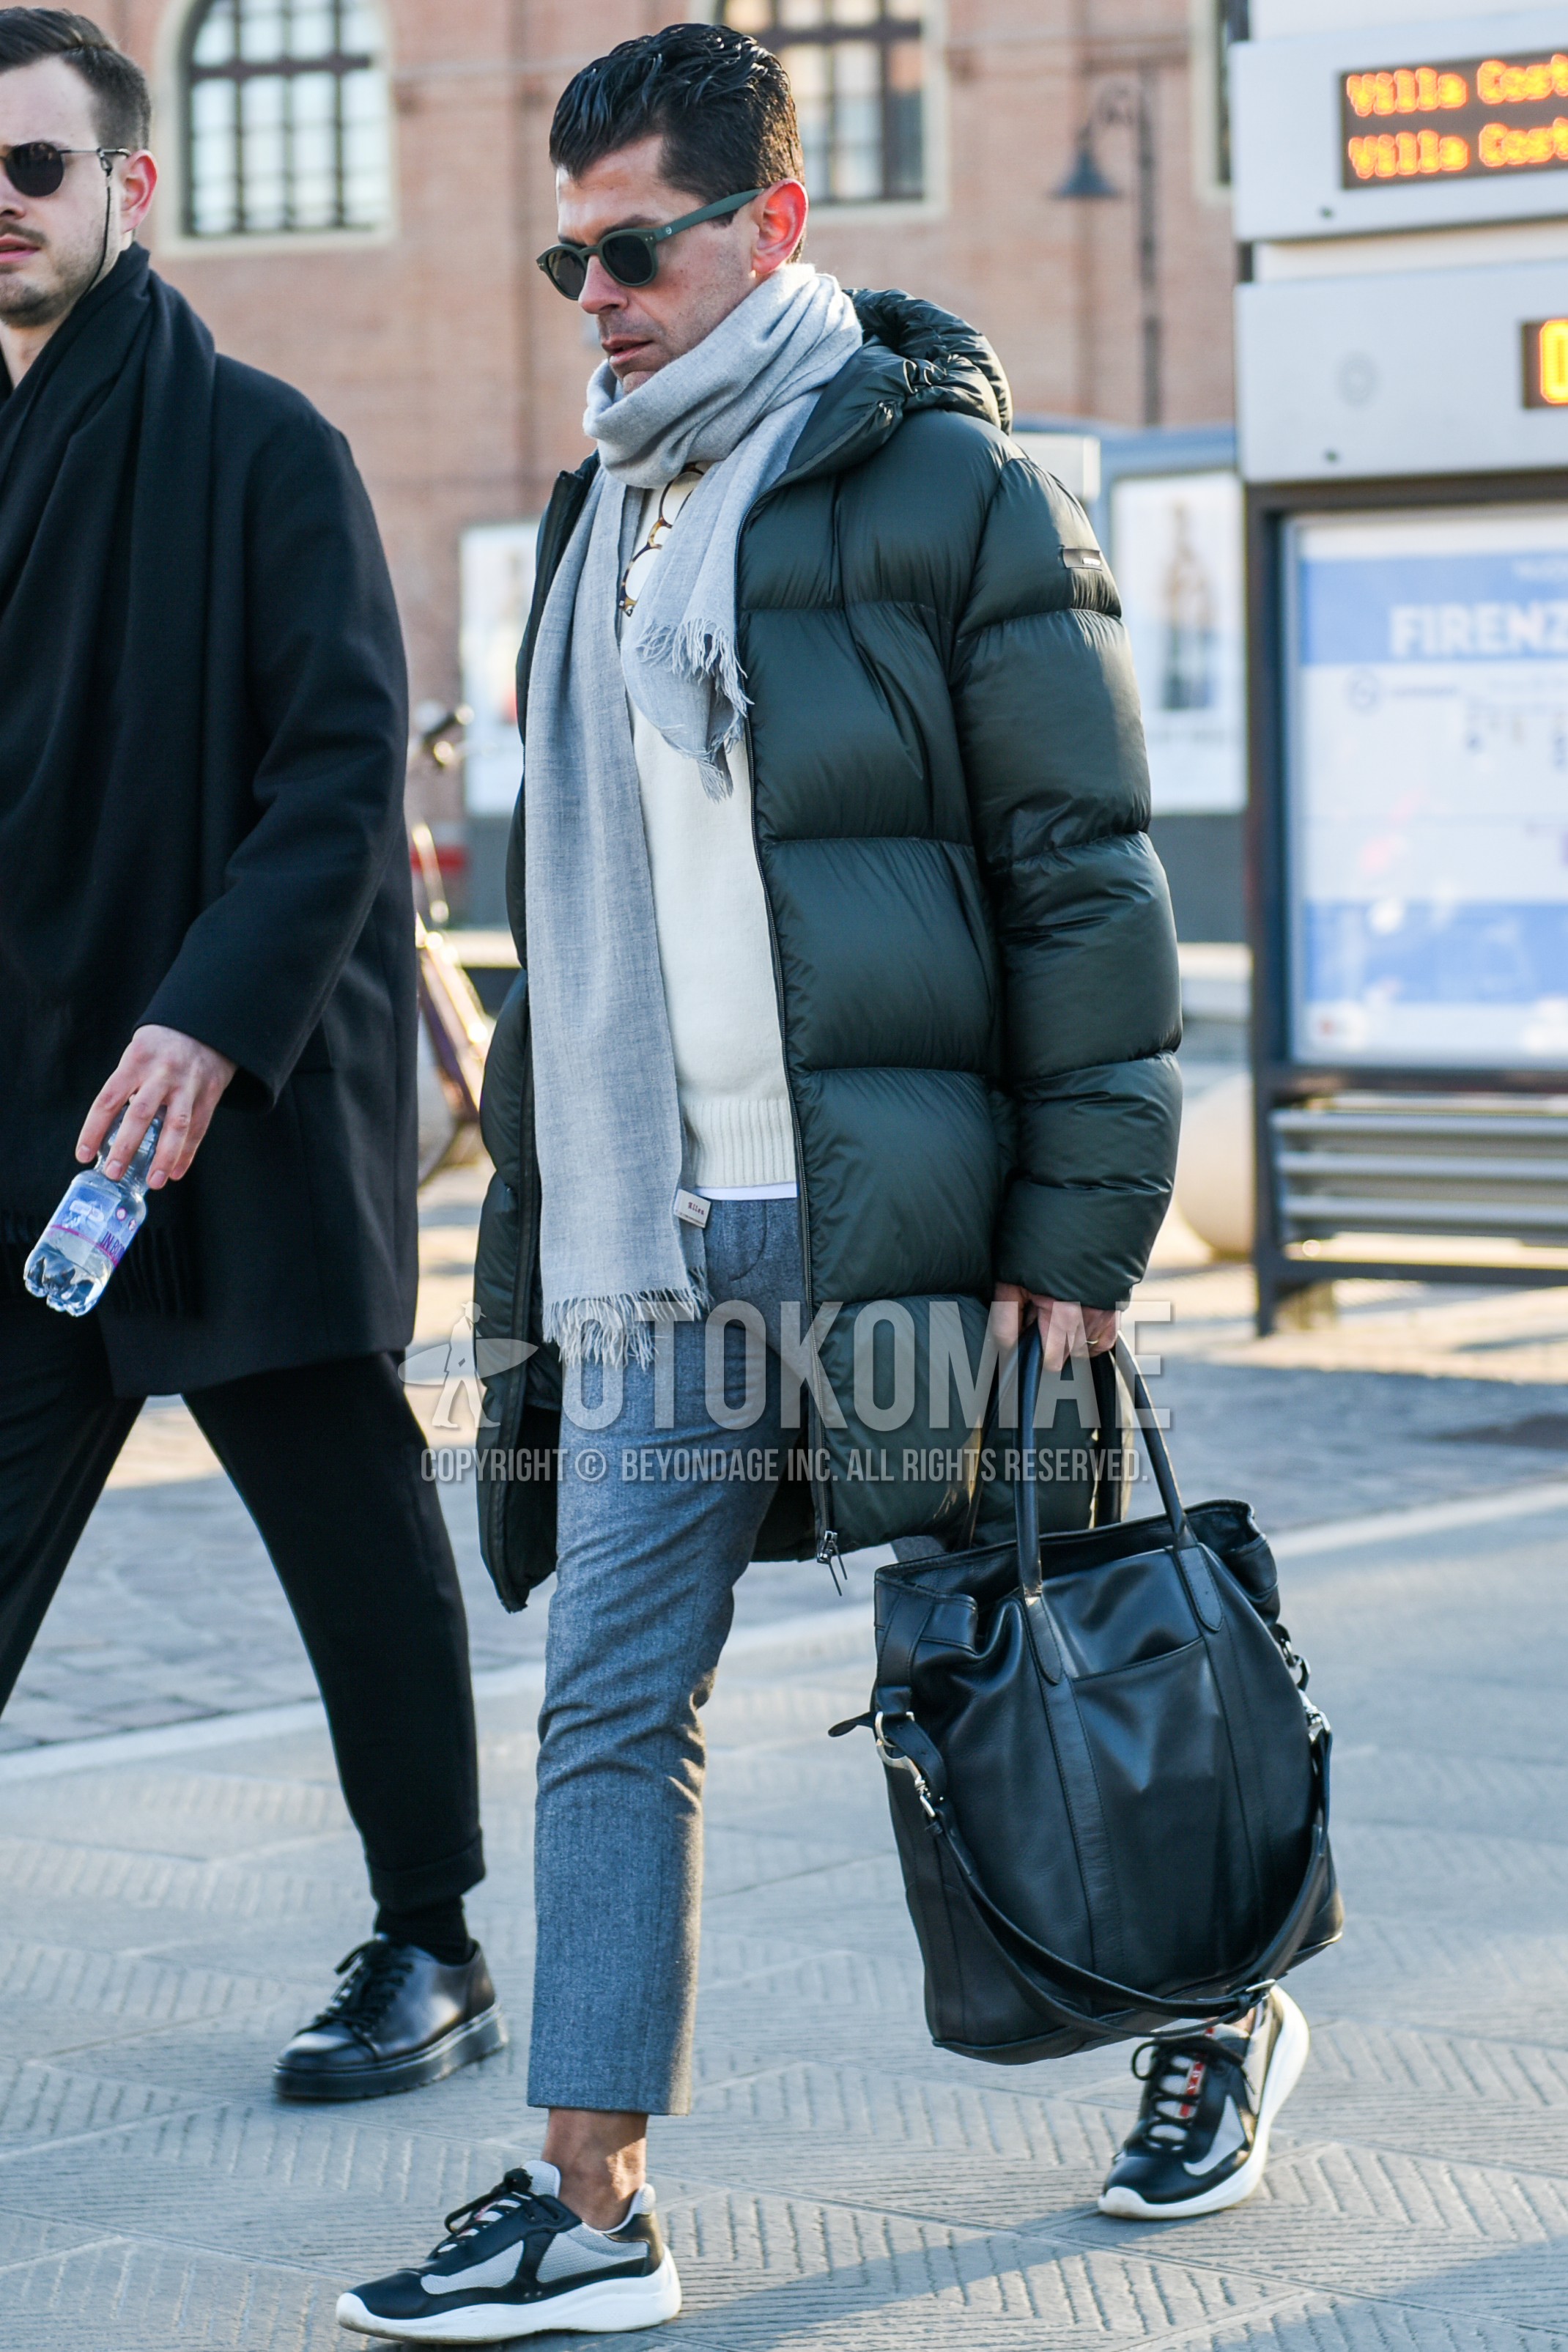 Men's autumn winter outfit with gray plain sunglasses, gray plain scarf, gray plain down jacket, gray plain hooded coat, white graphic sweater, gray plain slacks, gray plain cropped pants, gray low-cut sneakers, black plain briefcase/handbag.